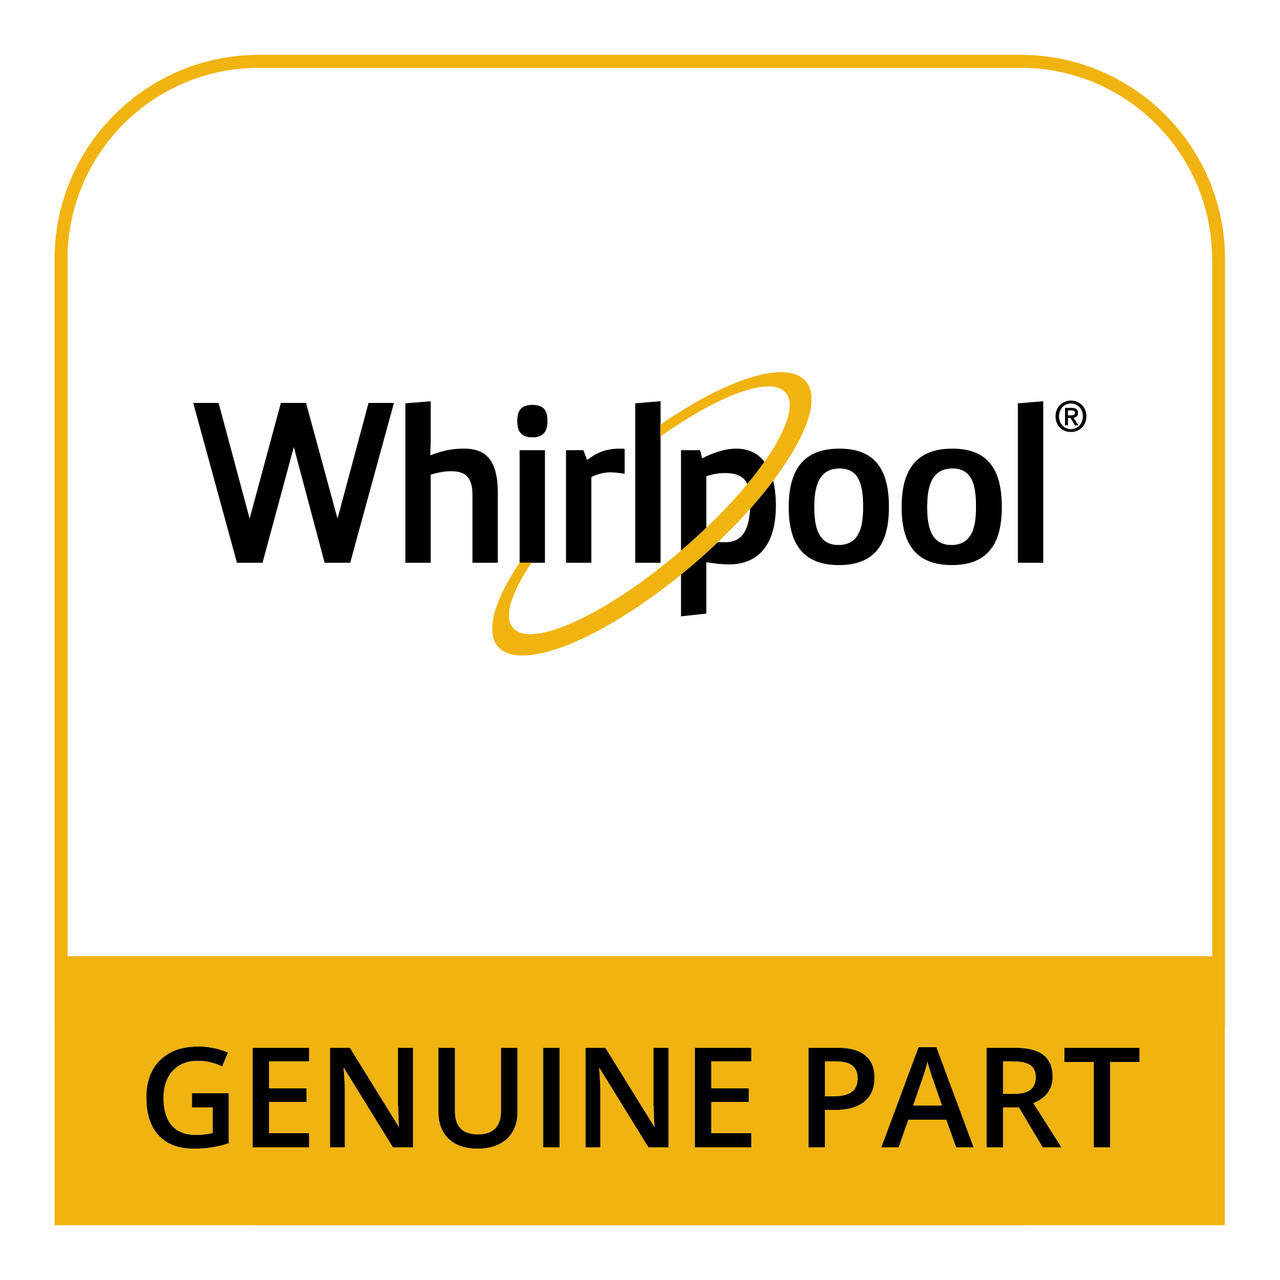 Whirlpool 279264 - Dryer Front Bearing and Felt Seal Kit - Genuine Part